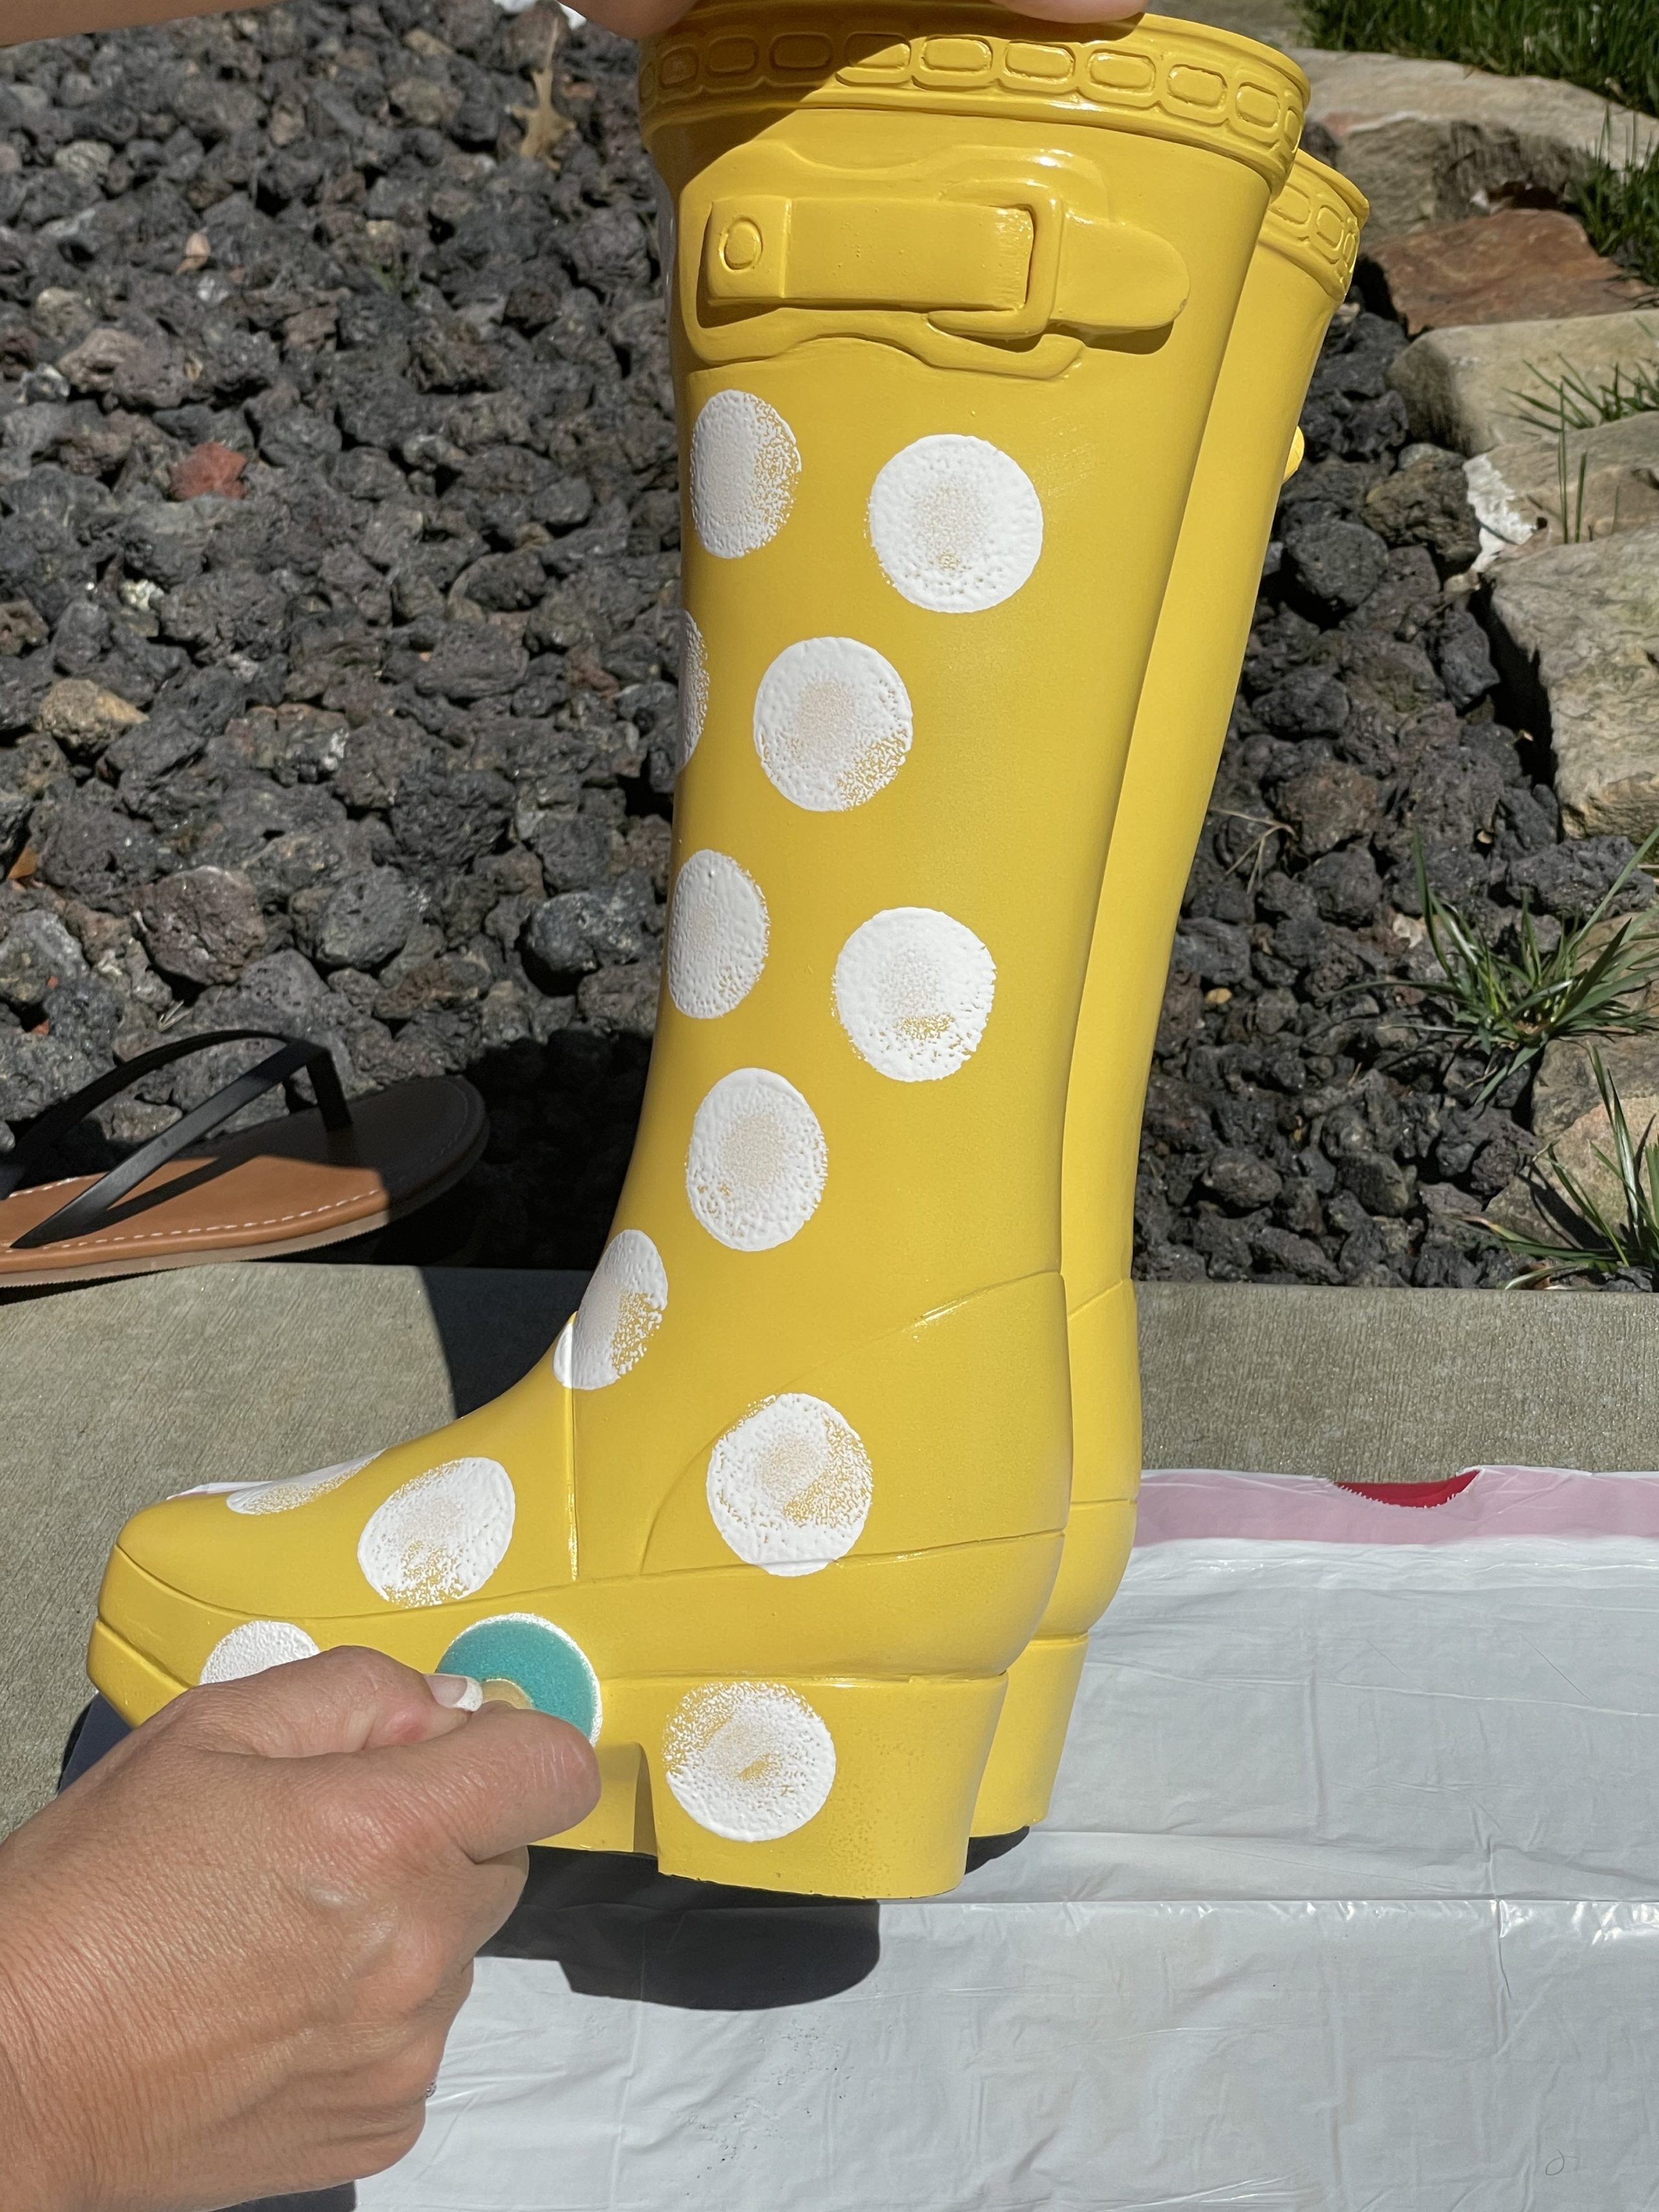 rubber boots planter makeover - Re-Fabbed